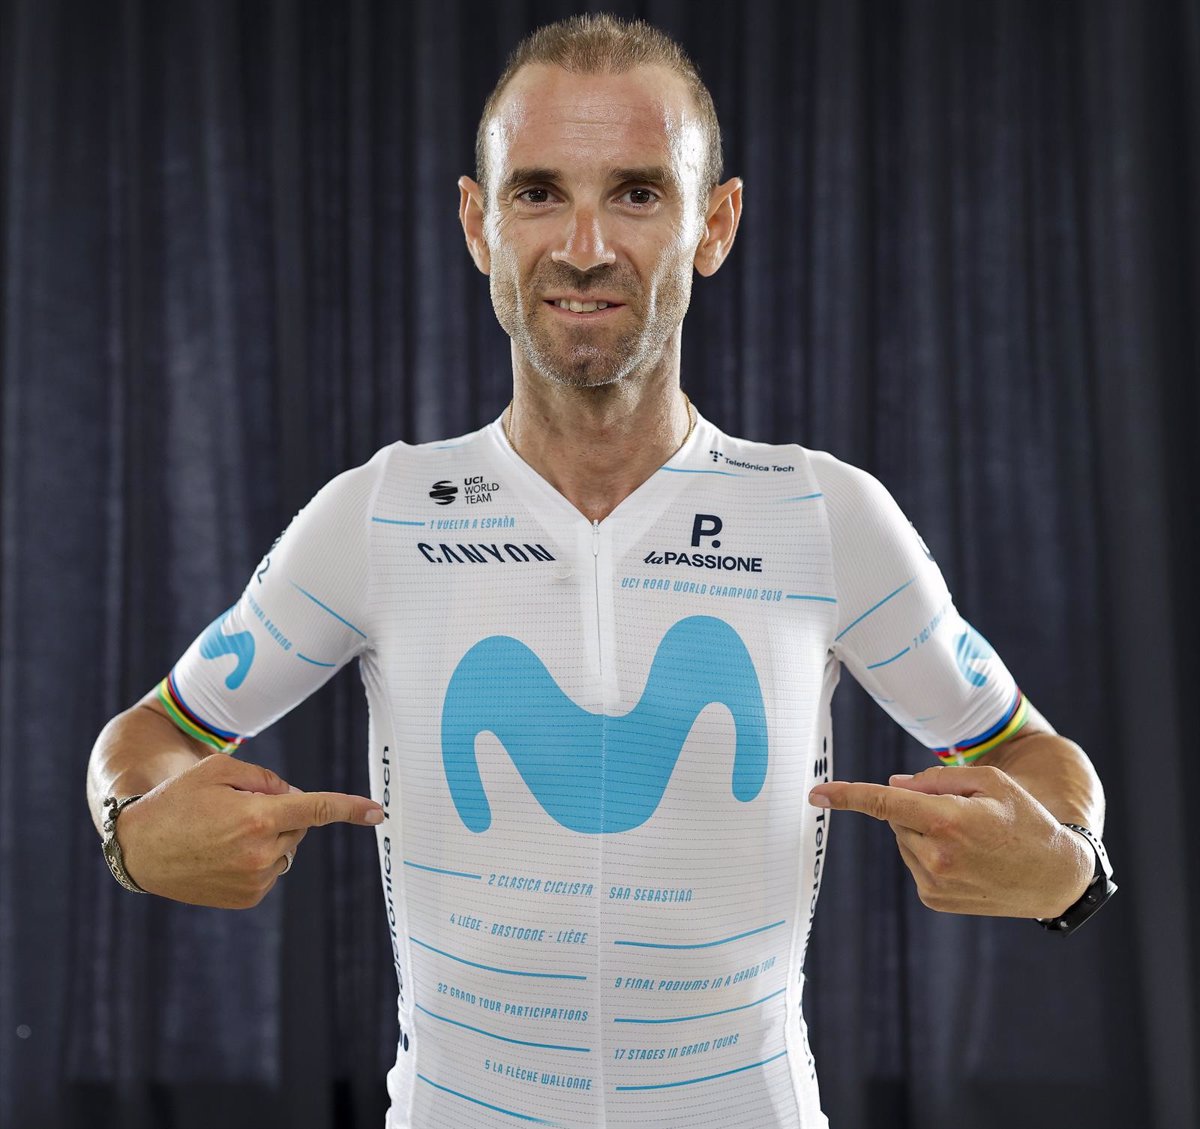 Alejandro Valverde is honored with a La Vuelta 22 shirt by Movistar Team